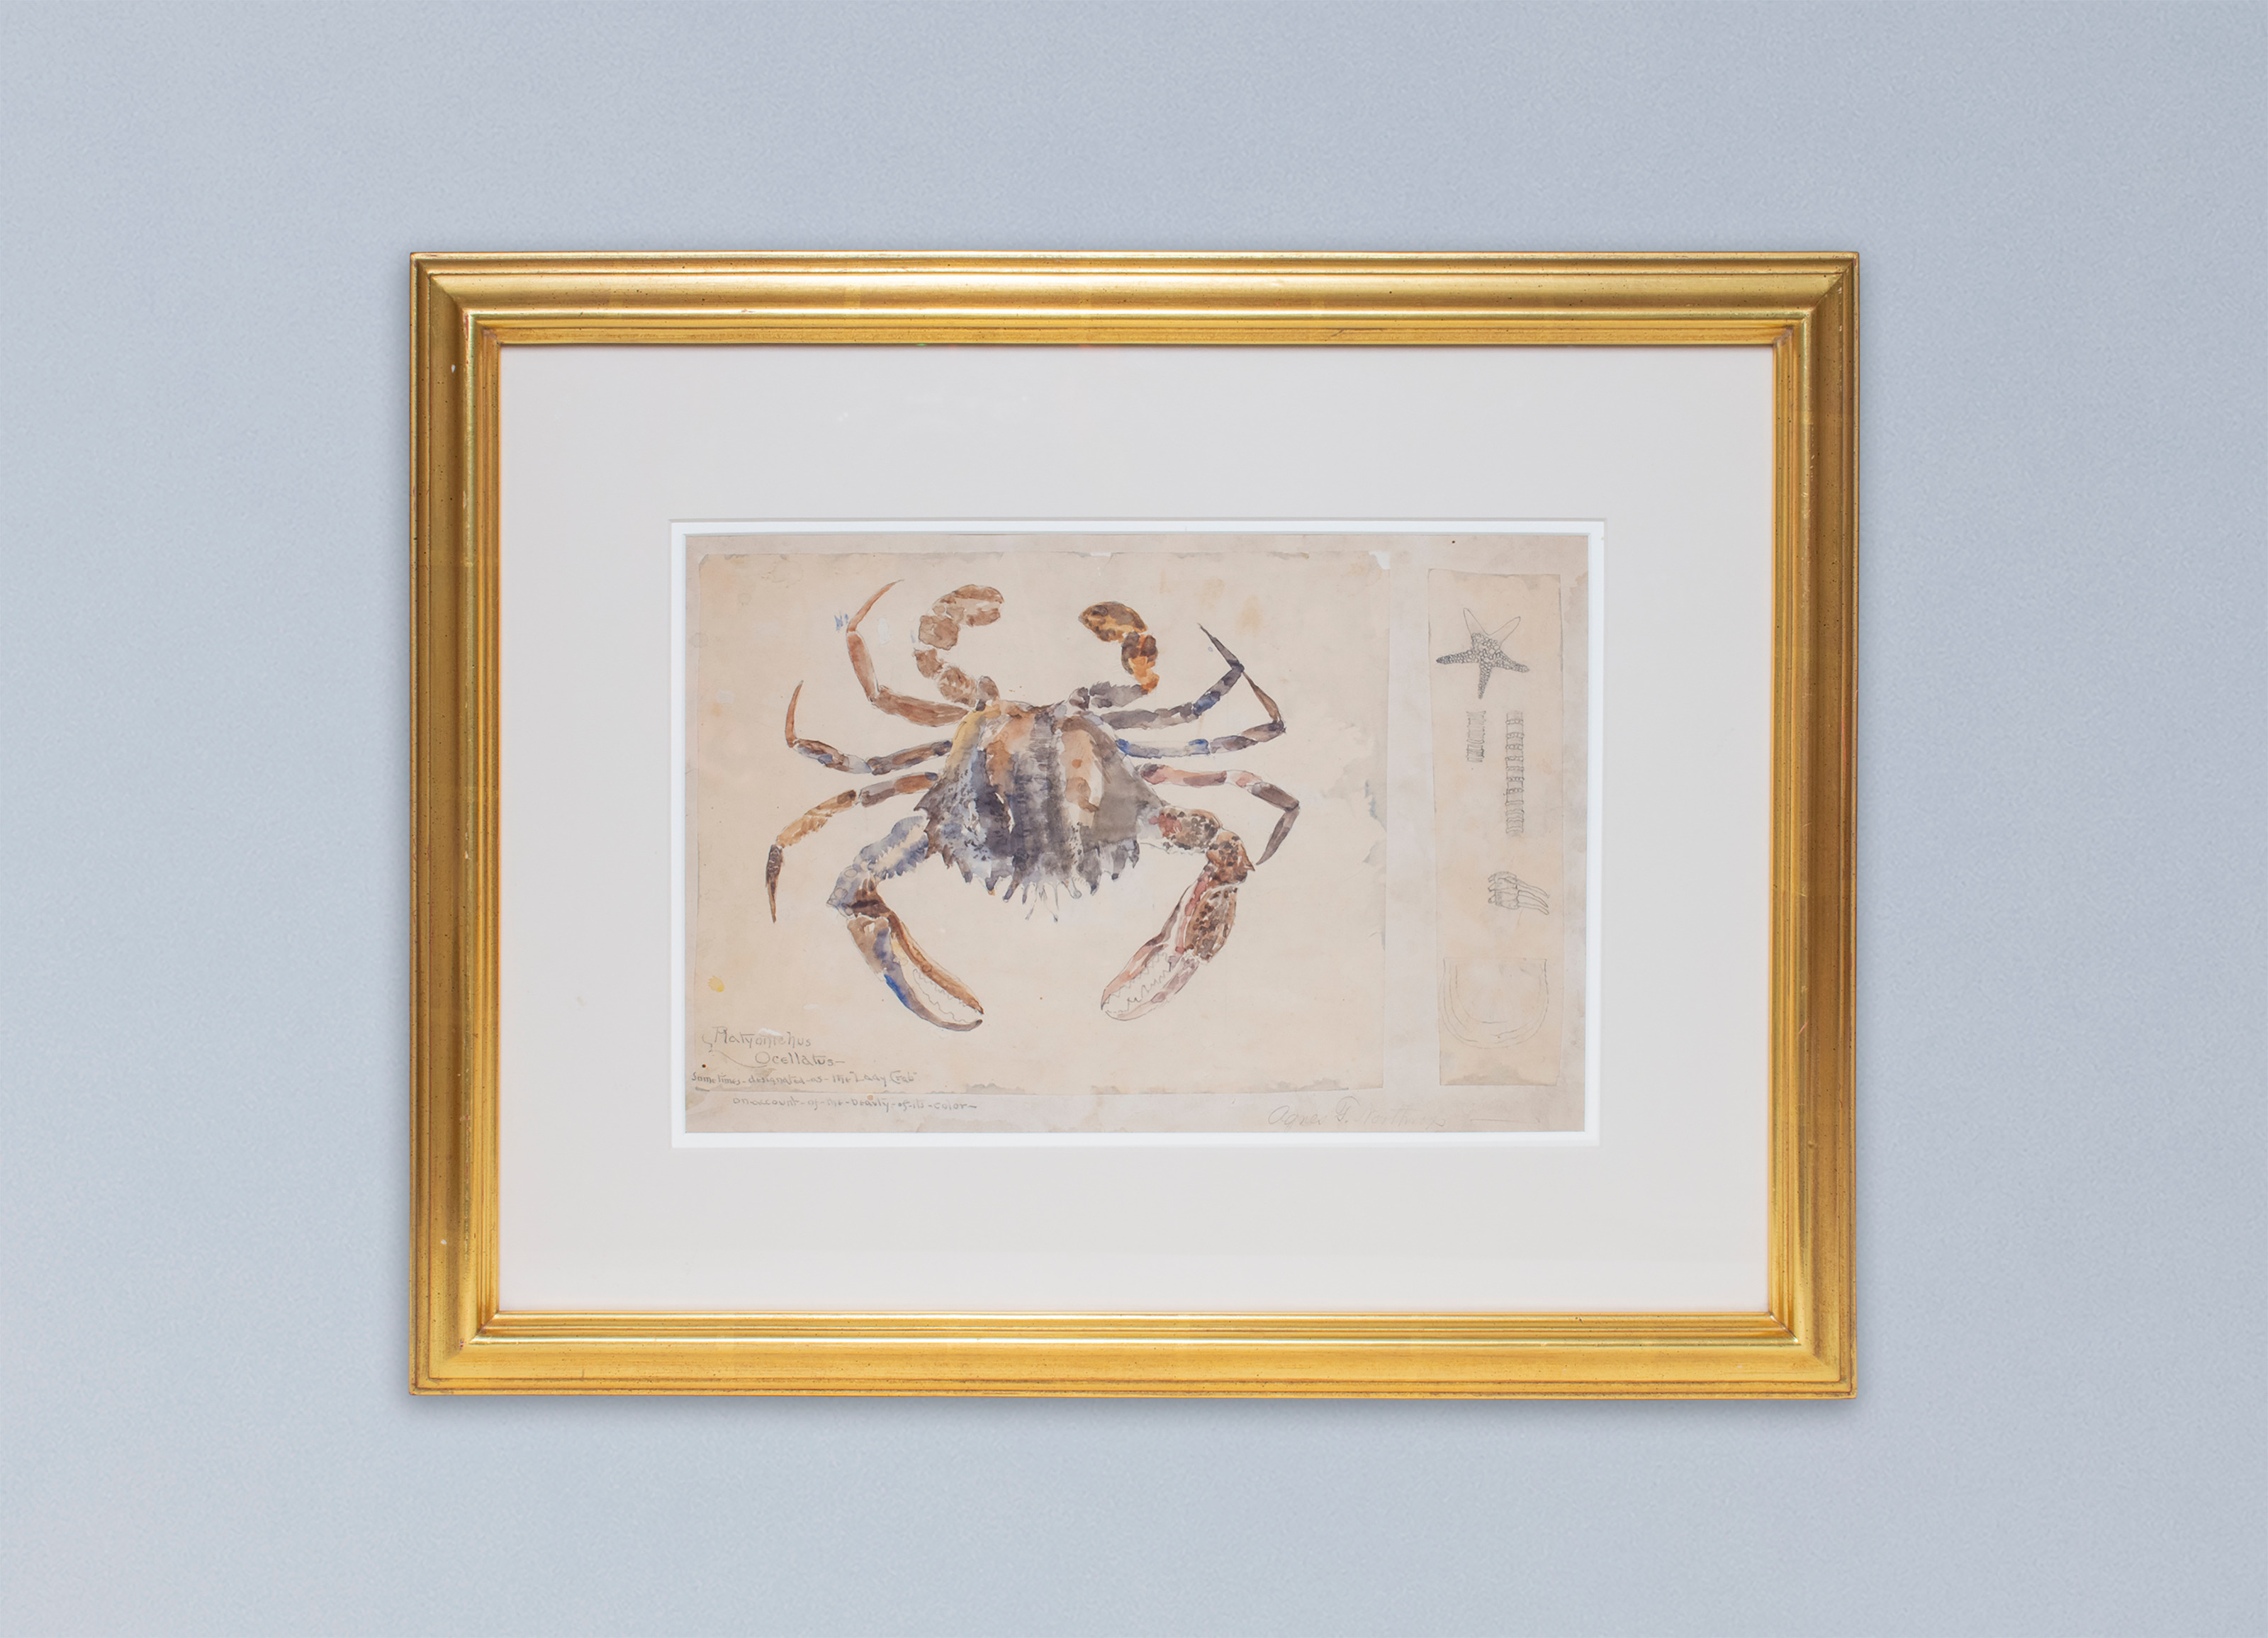 A framed watercolor of a series of watercolor and pencil studies done by the seaside, depicting shells, starfish, and other marine life, with various notations in pencil. The main drawing on the page is of a &quot;Lady Crab.&quot;